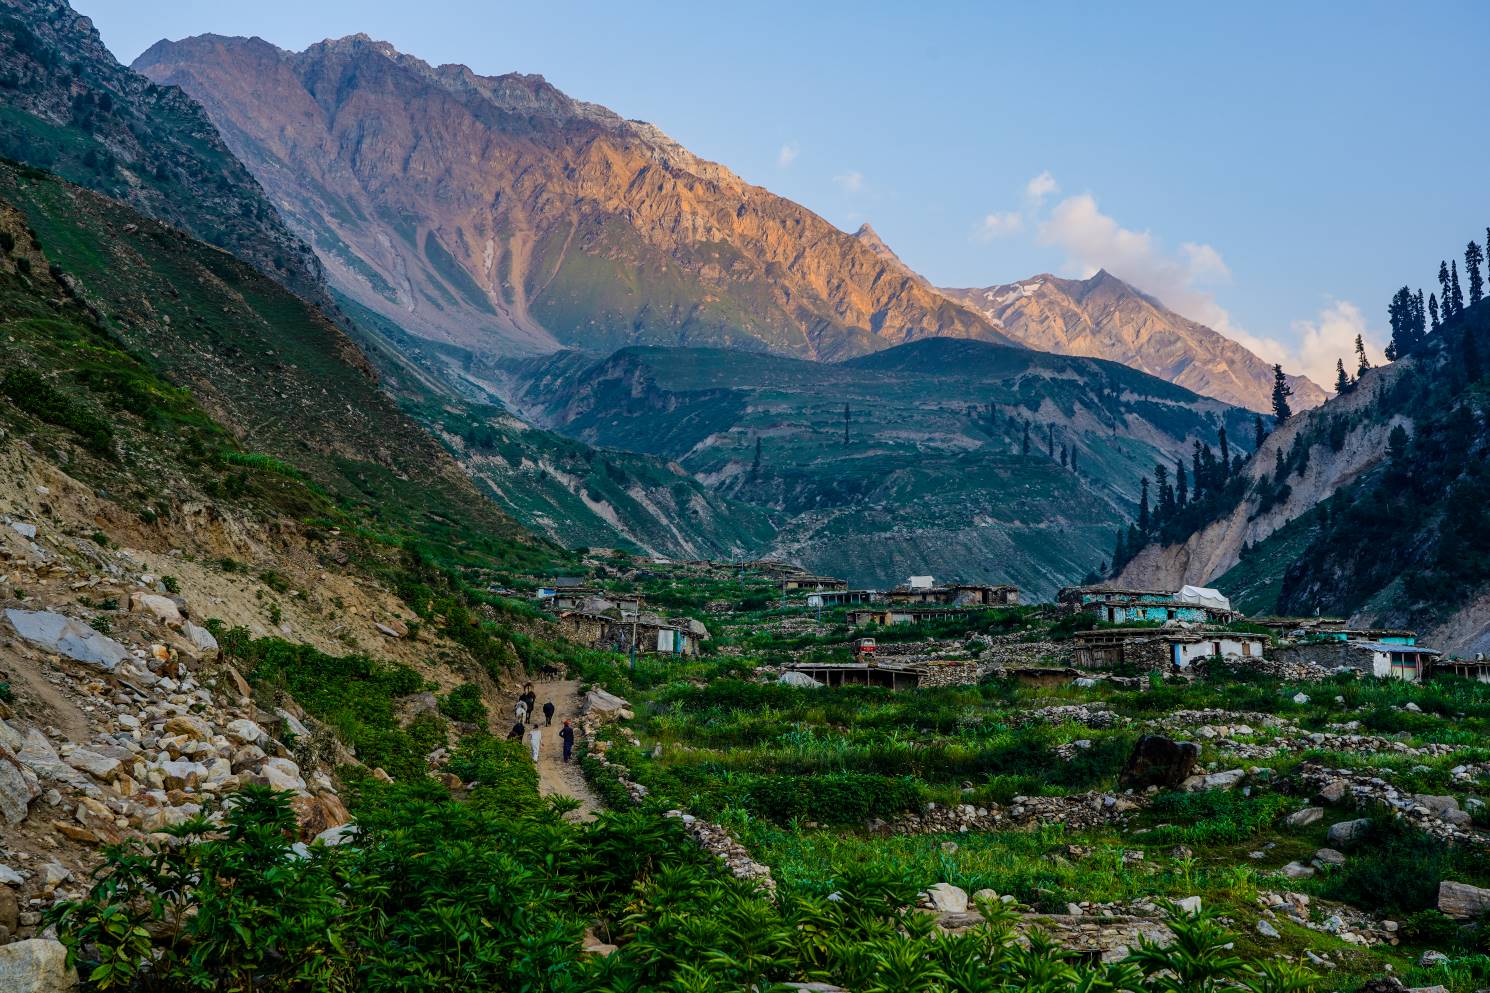 sunset over a lush green village in the naran region of pakistan